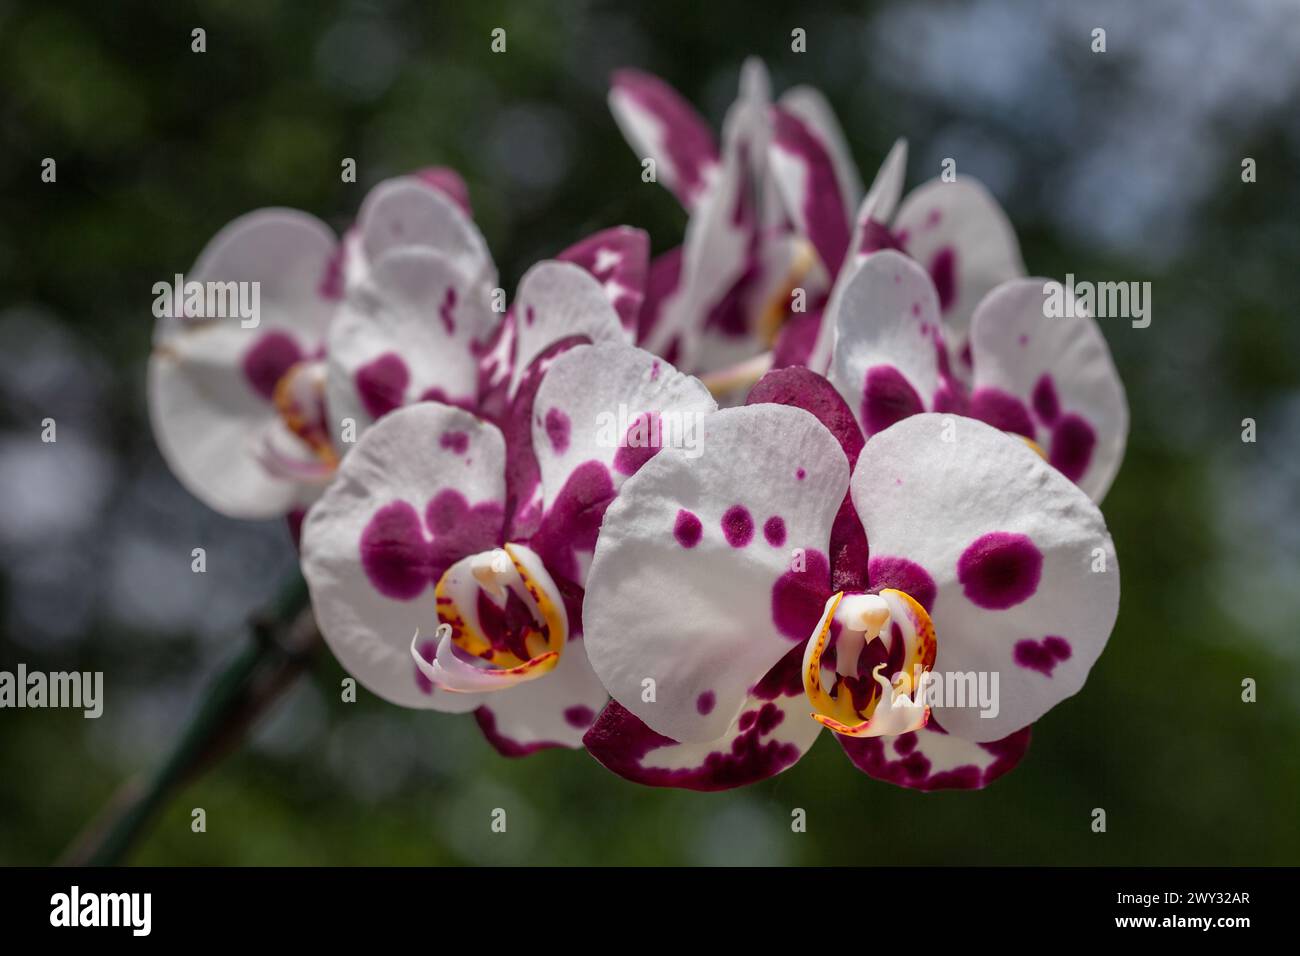 White, purple, and yellow orchid flowers, Phalaenopsis Stock Photo